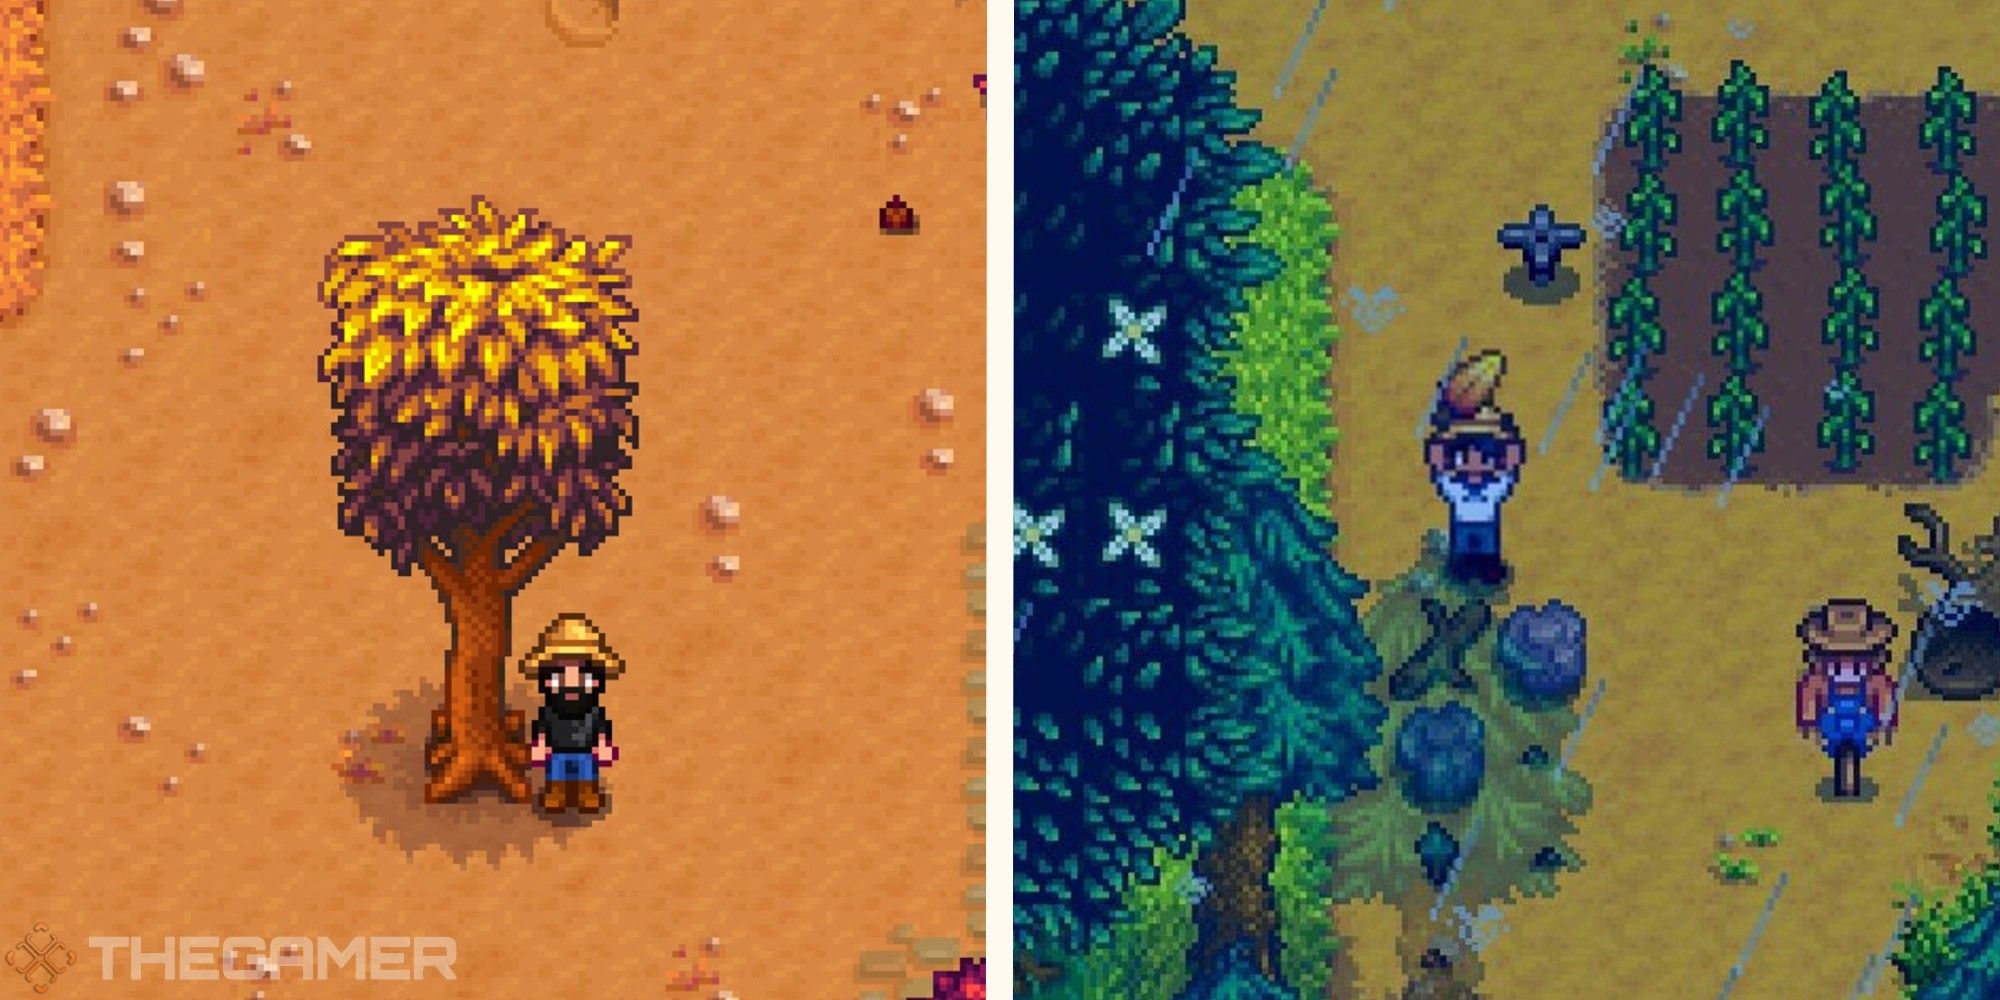 image of player with mahogany tree, next to image of player holding mahogany seed